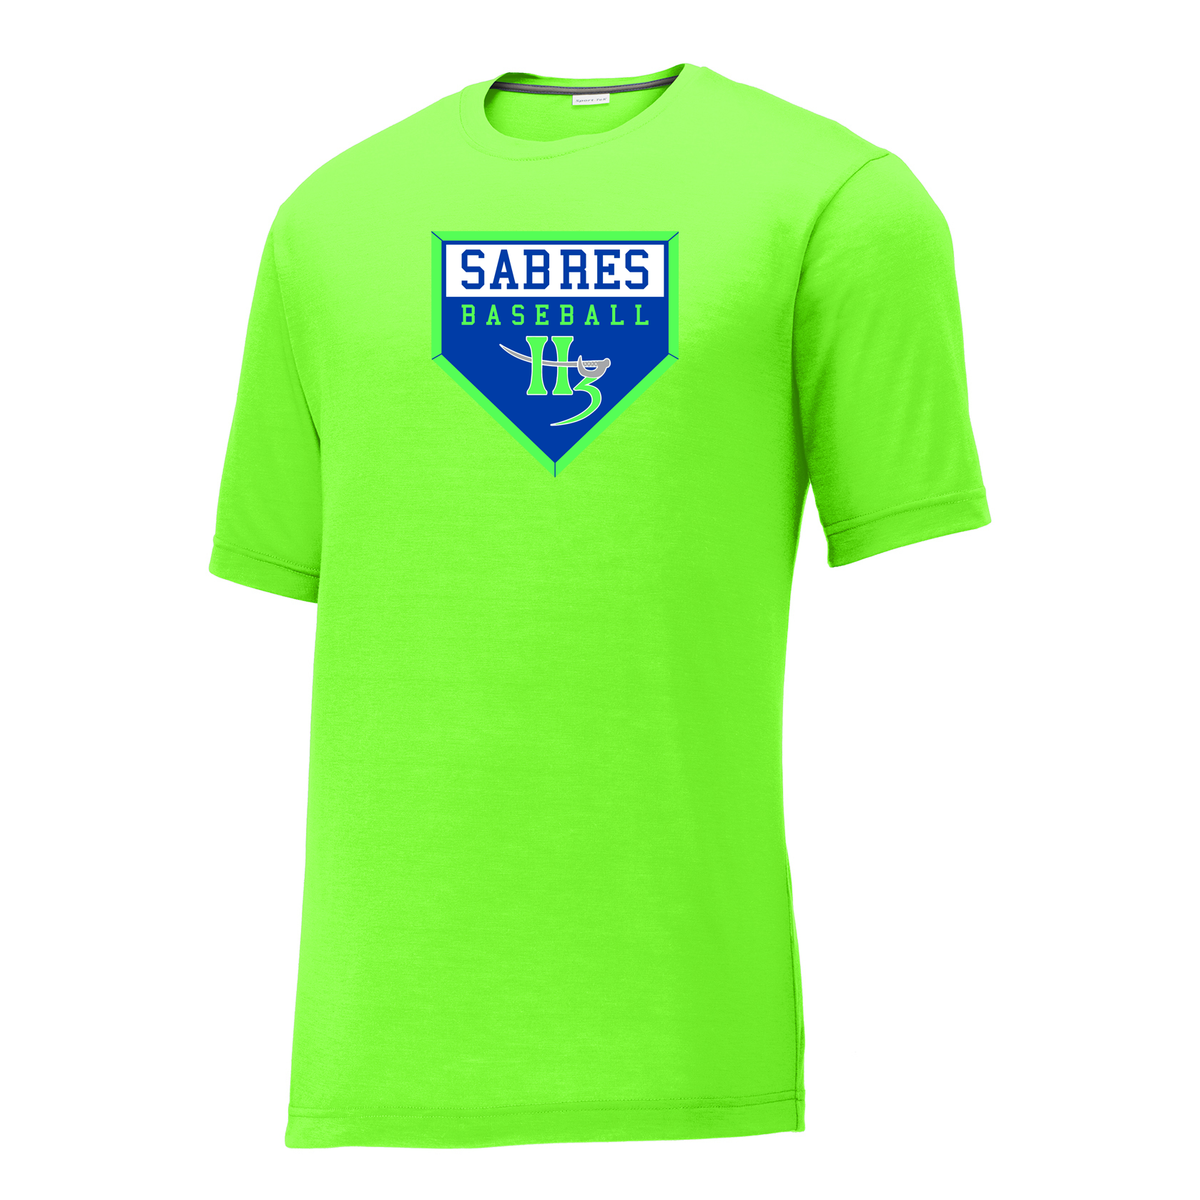 H3 Sabres Baseball CottonTouch Performance T-Shirt